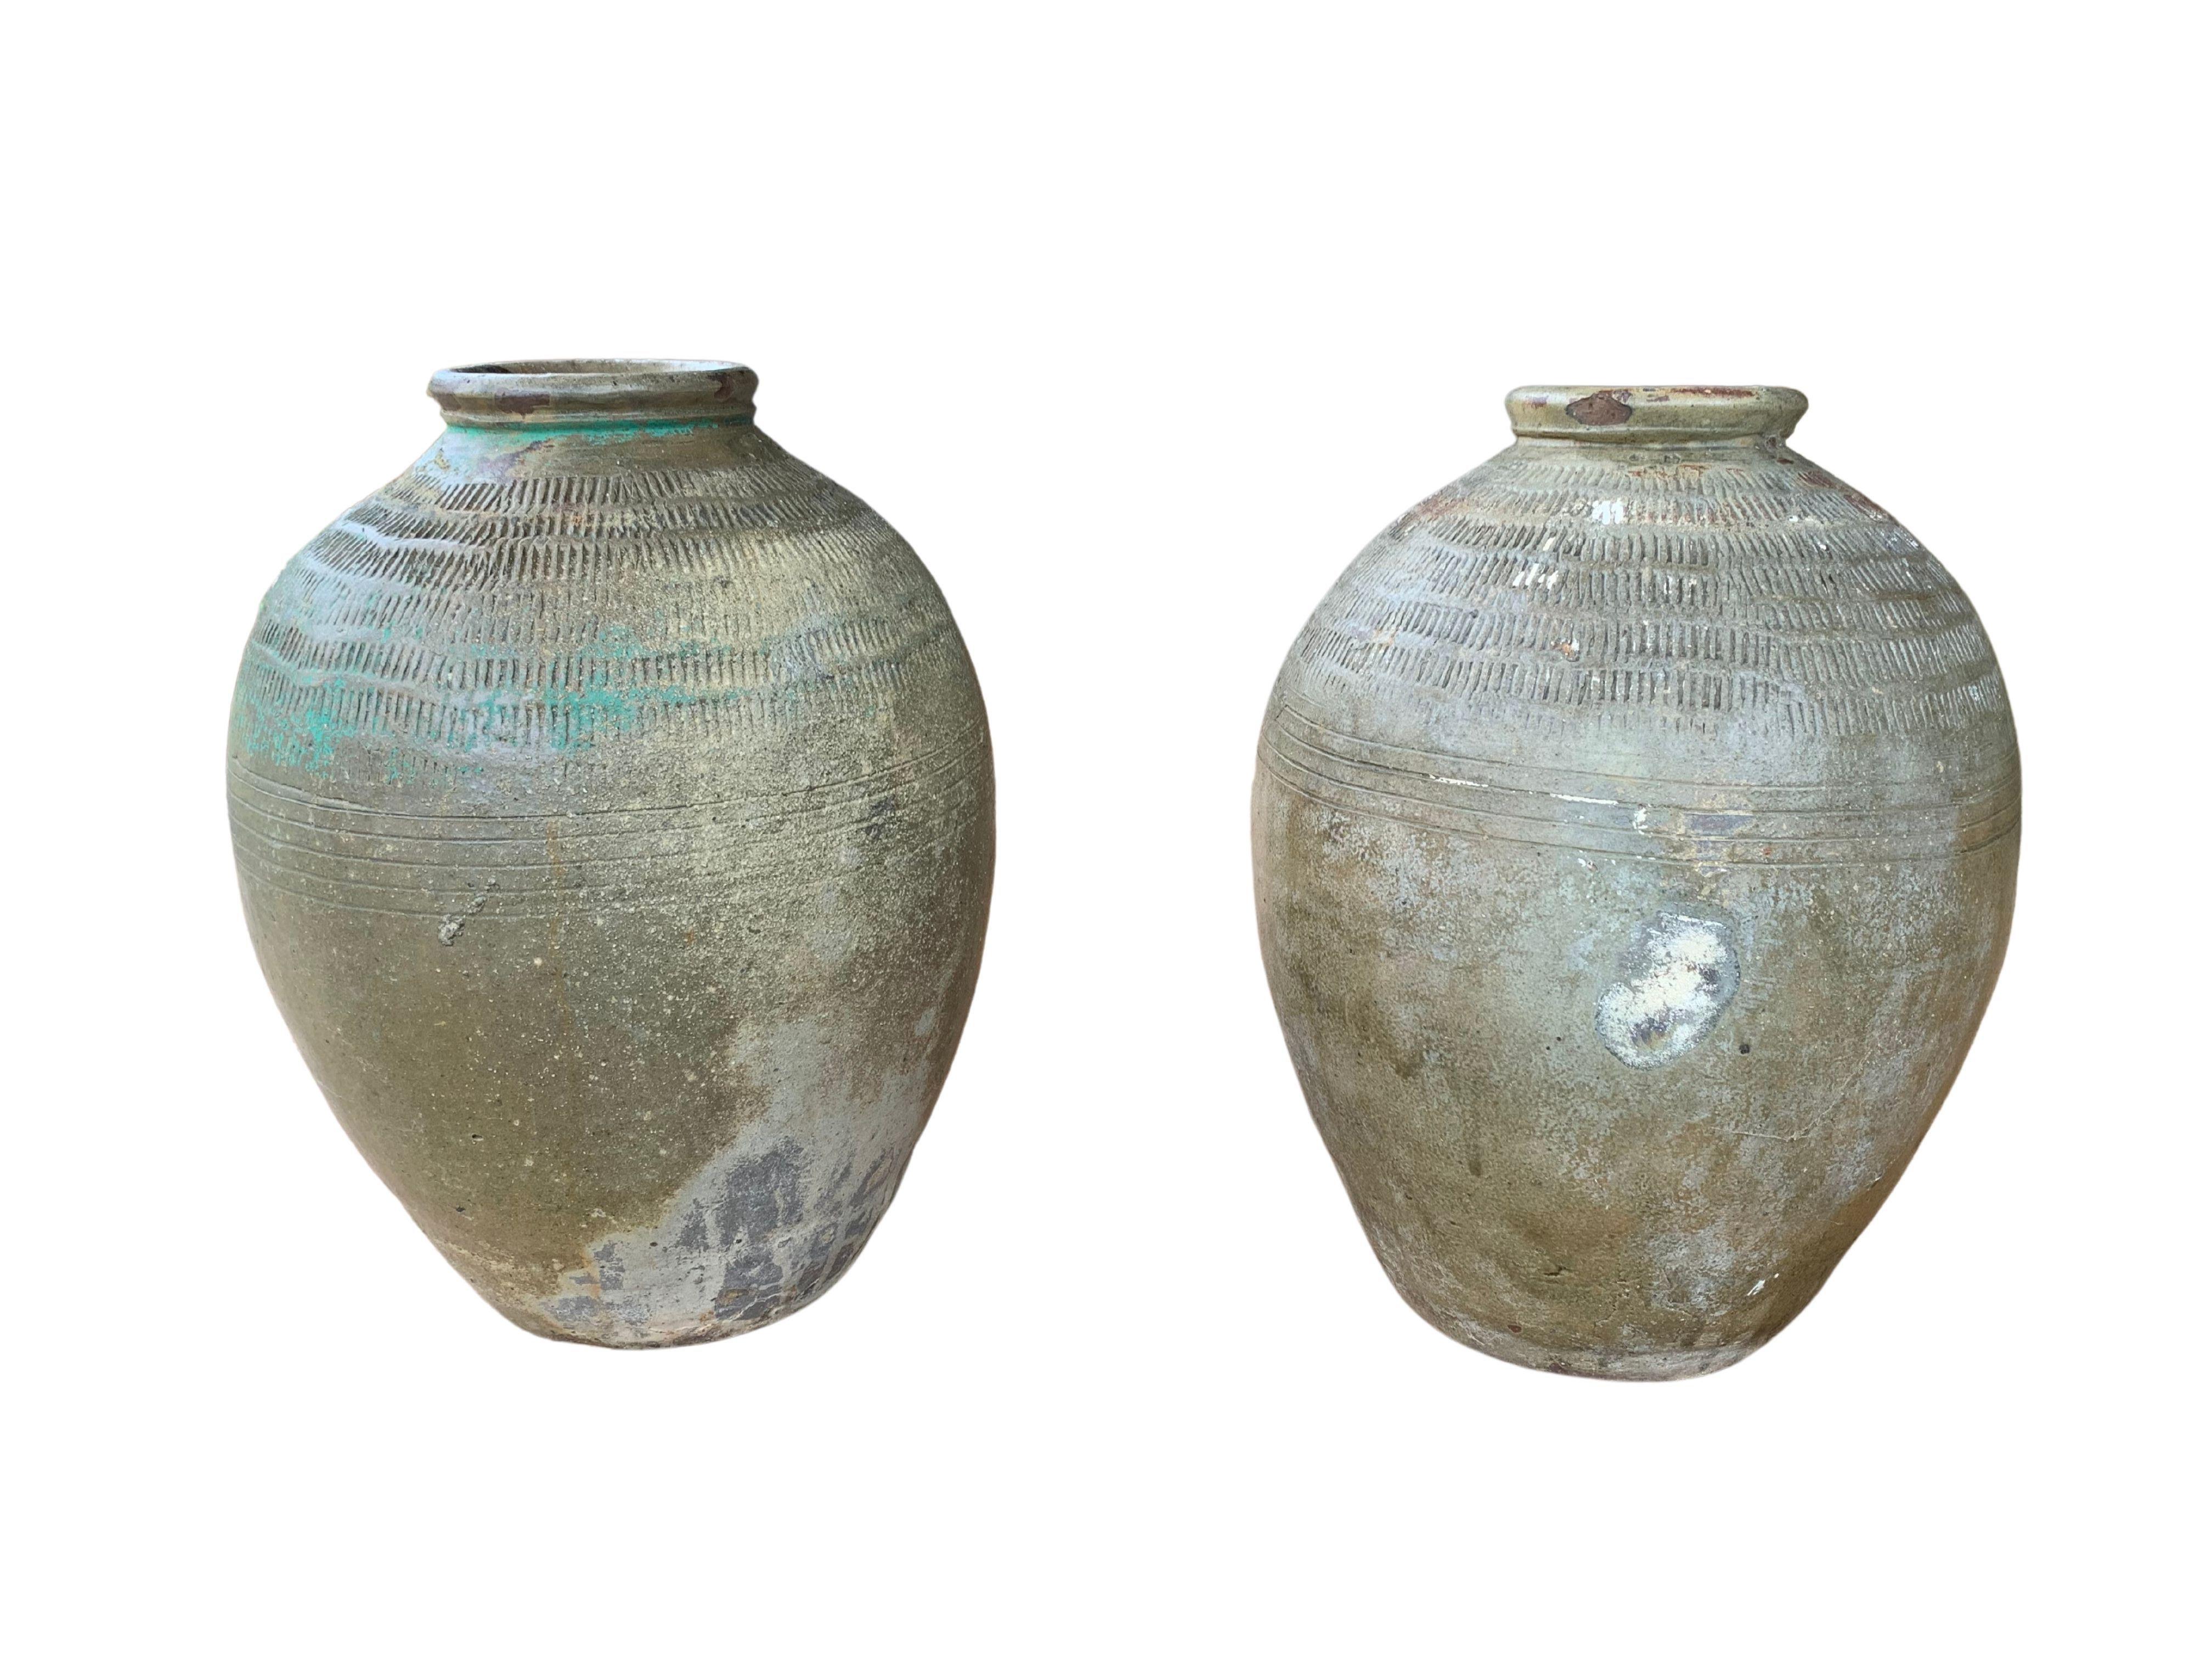 These glazed Chinese ceramic jars from the turn of the 19th Century were once used for pickling foods. They feature a jade green finish and outer surface that features a ribbed texture. A great example of Chinese pottery, their imperfections and